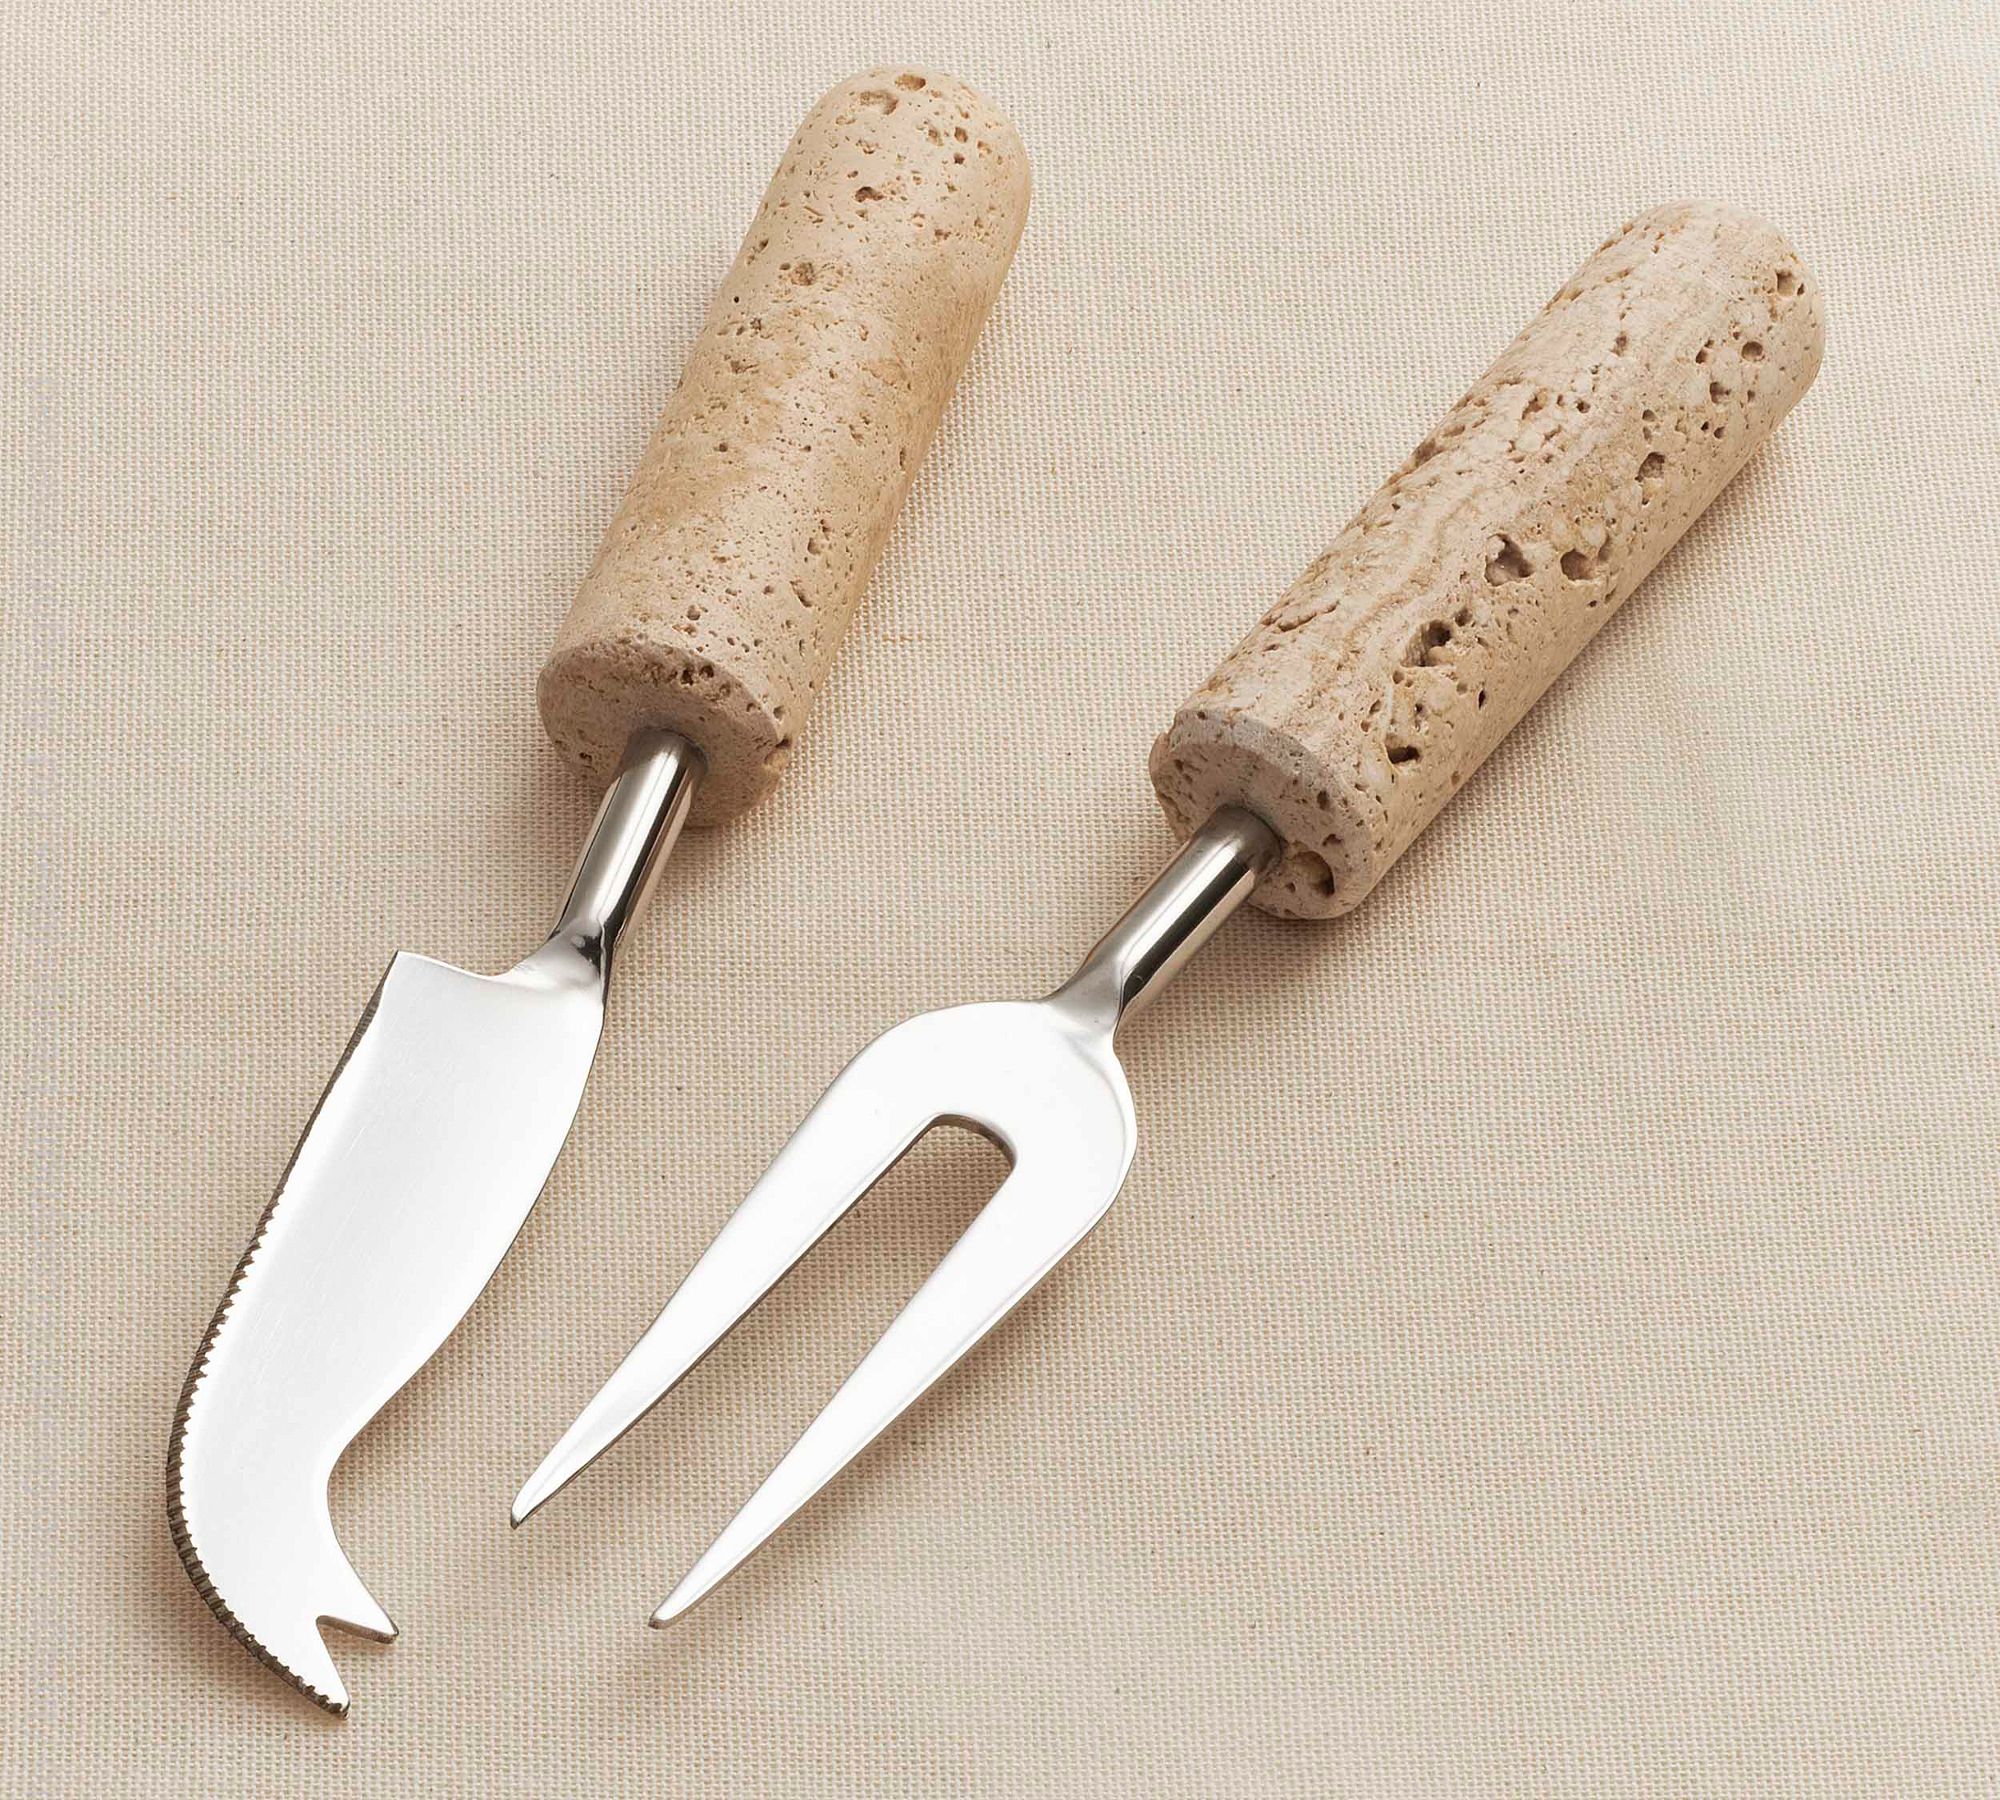 Margot Handcrafted Travertine Cheese Knives - Set of 2